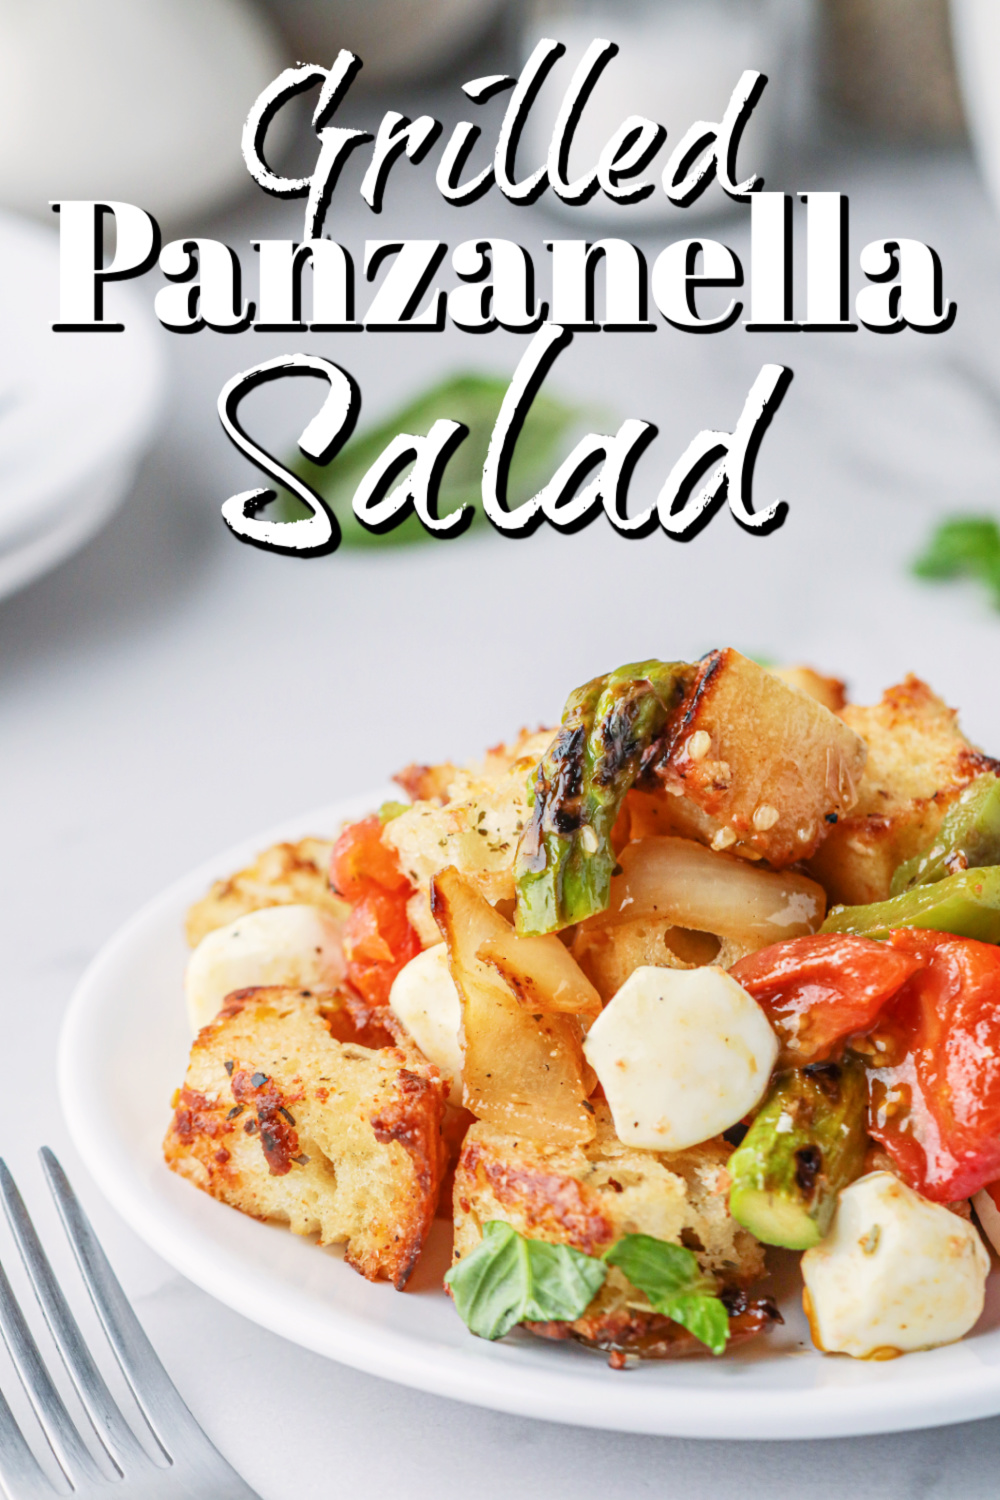 This fantastic grilled panzanella salad is quick and easy to prepare but is loaded with great flavor!